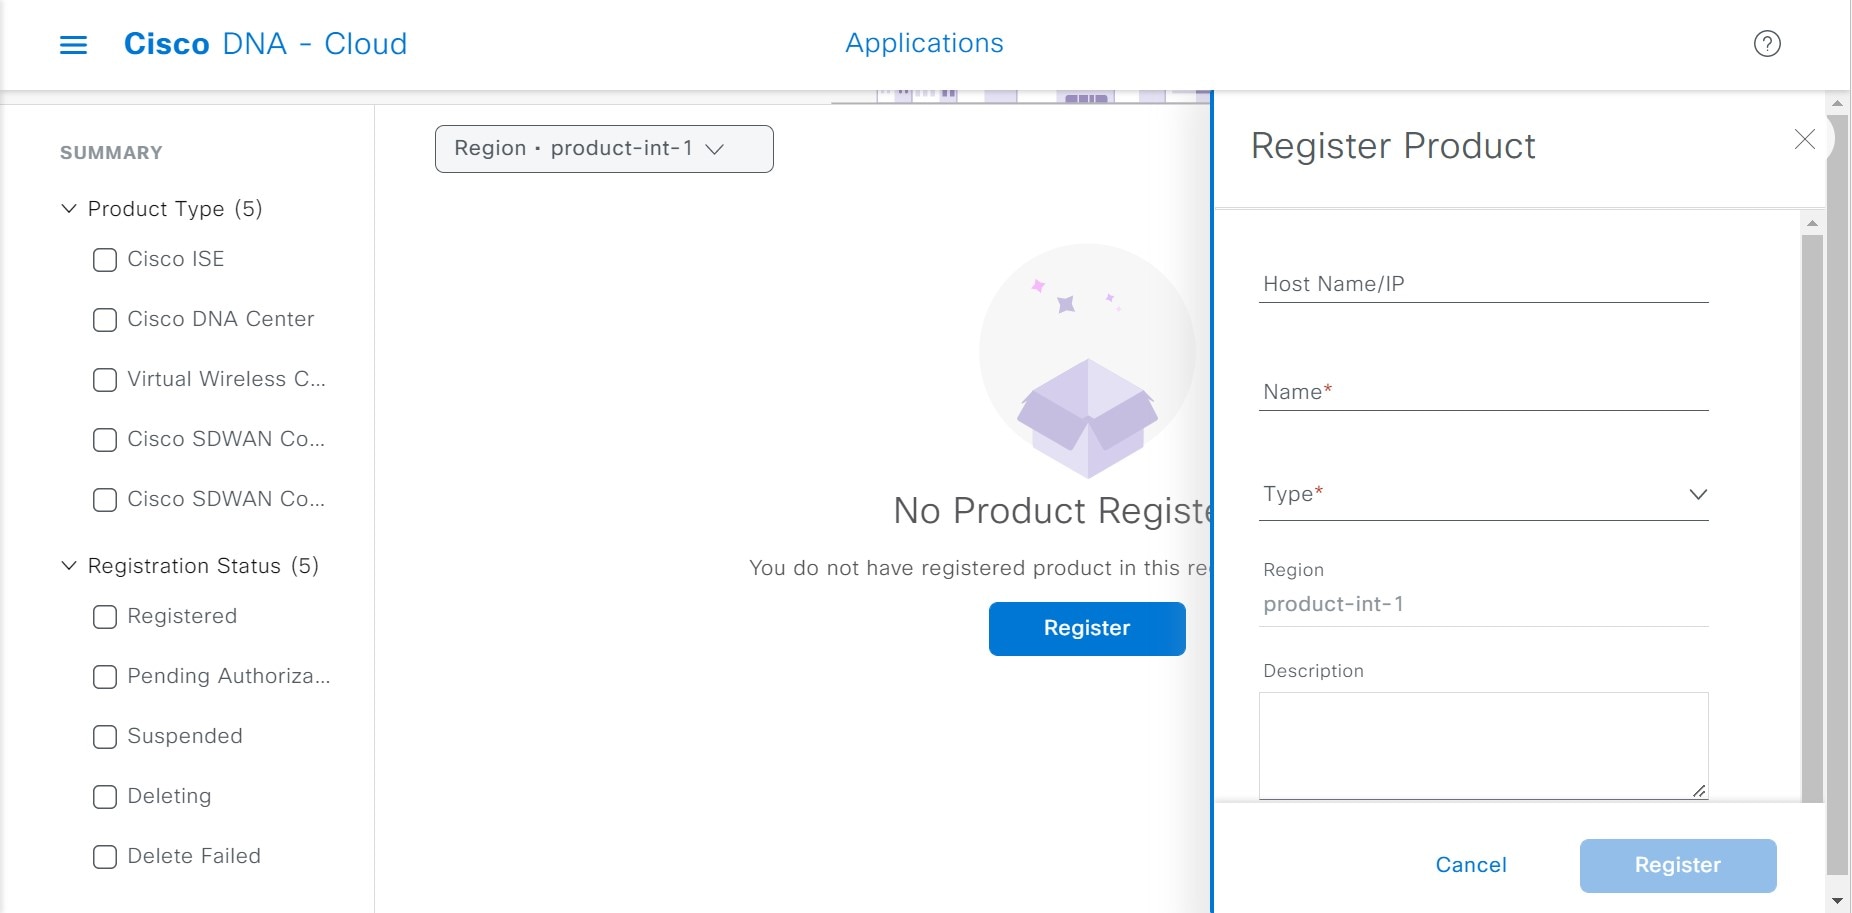 Registering a product to Cisco DNA - Cloud